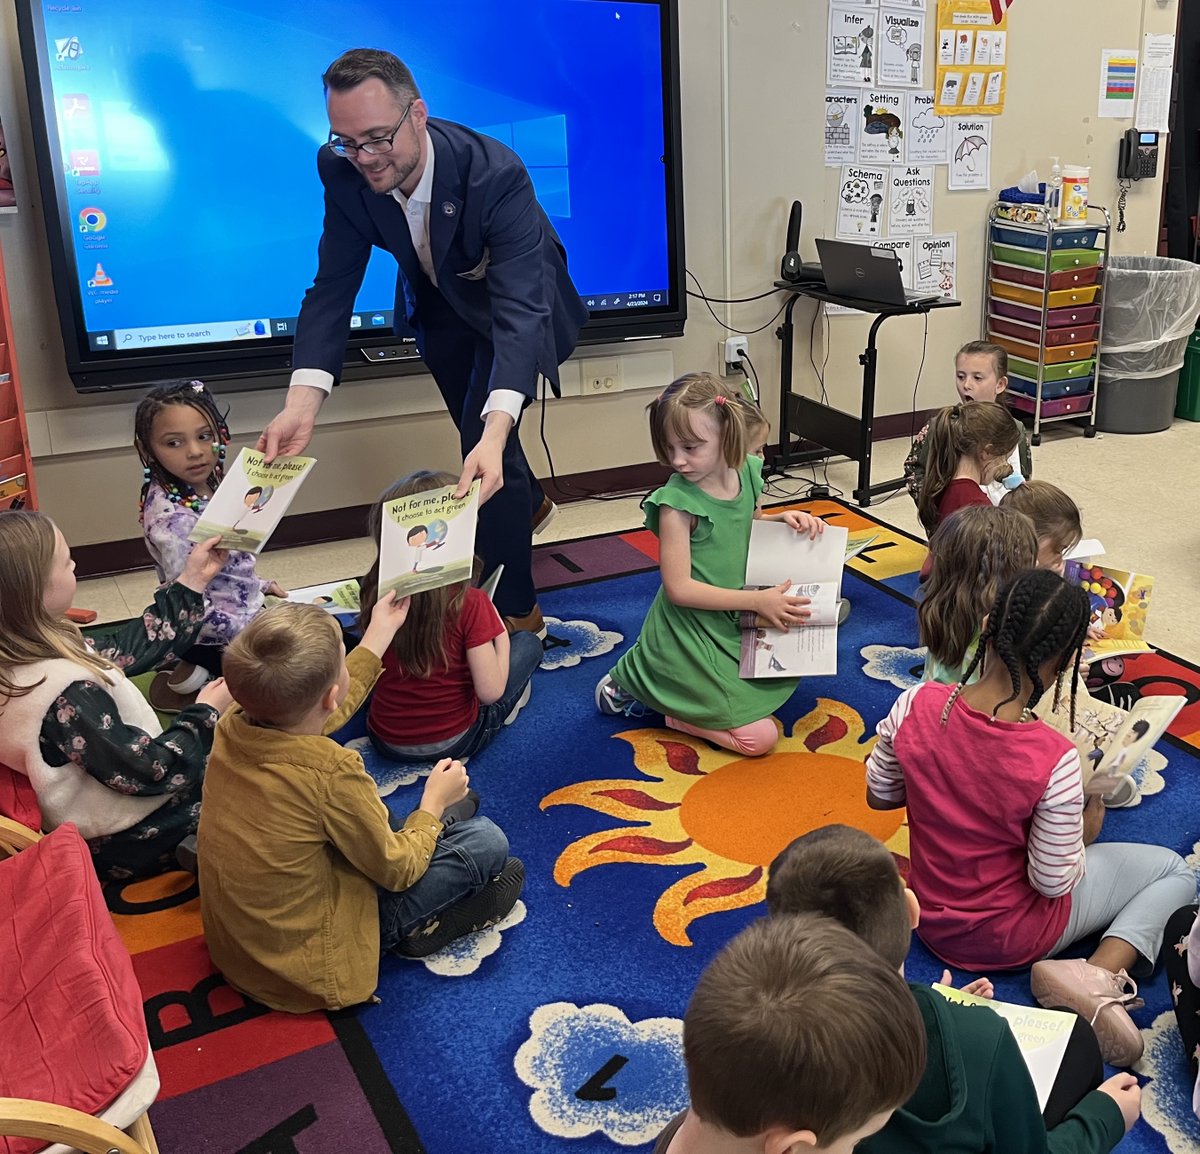 To celebrate #EarthWeek, I shared my love of reading & the importance of protecting our environment w/ a class of 20 first-grade scholars at Kingsborough Elementary School in Gloversville today. Their energy & enthusiasm was contagious: Our planet is in good hands! 
cc: @jpopcun